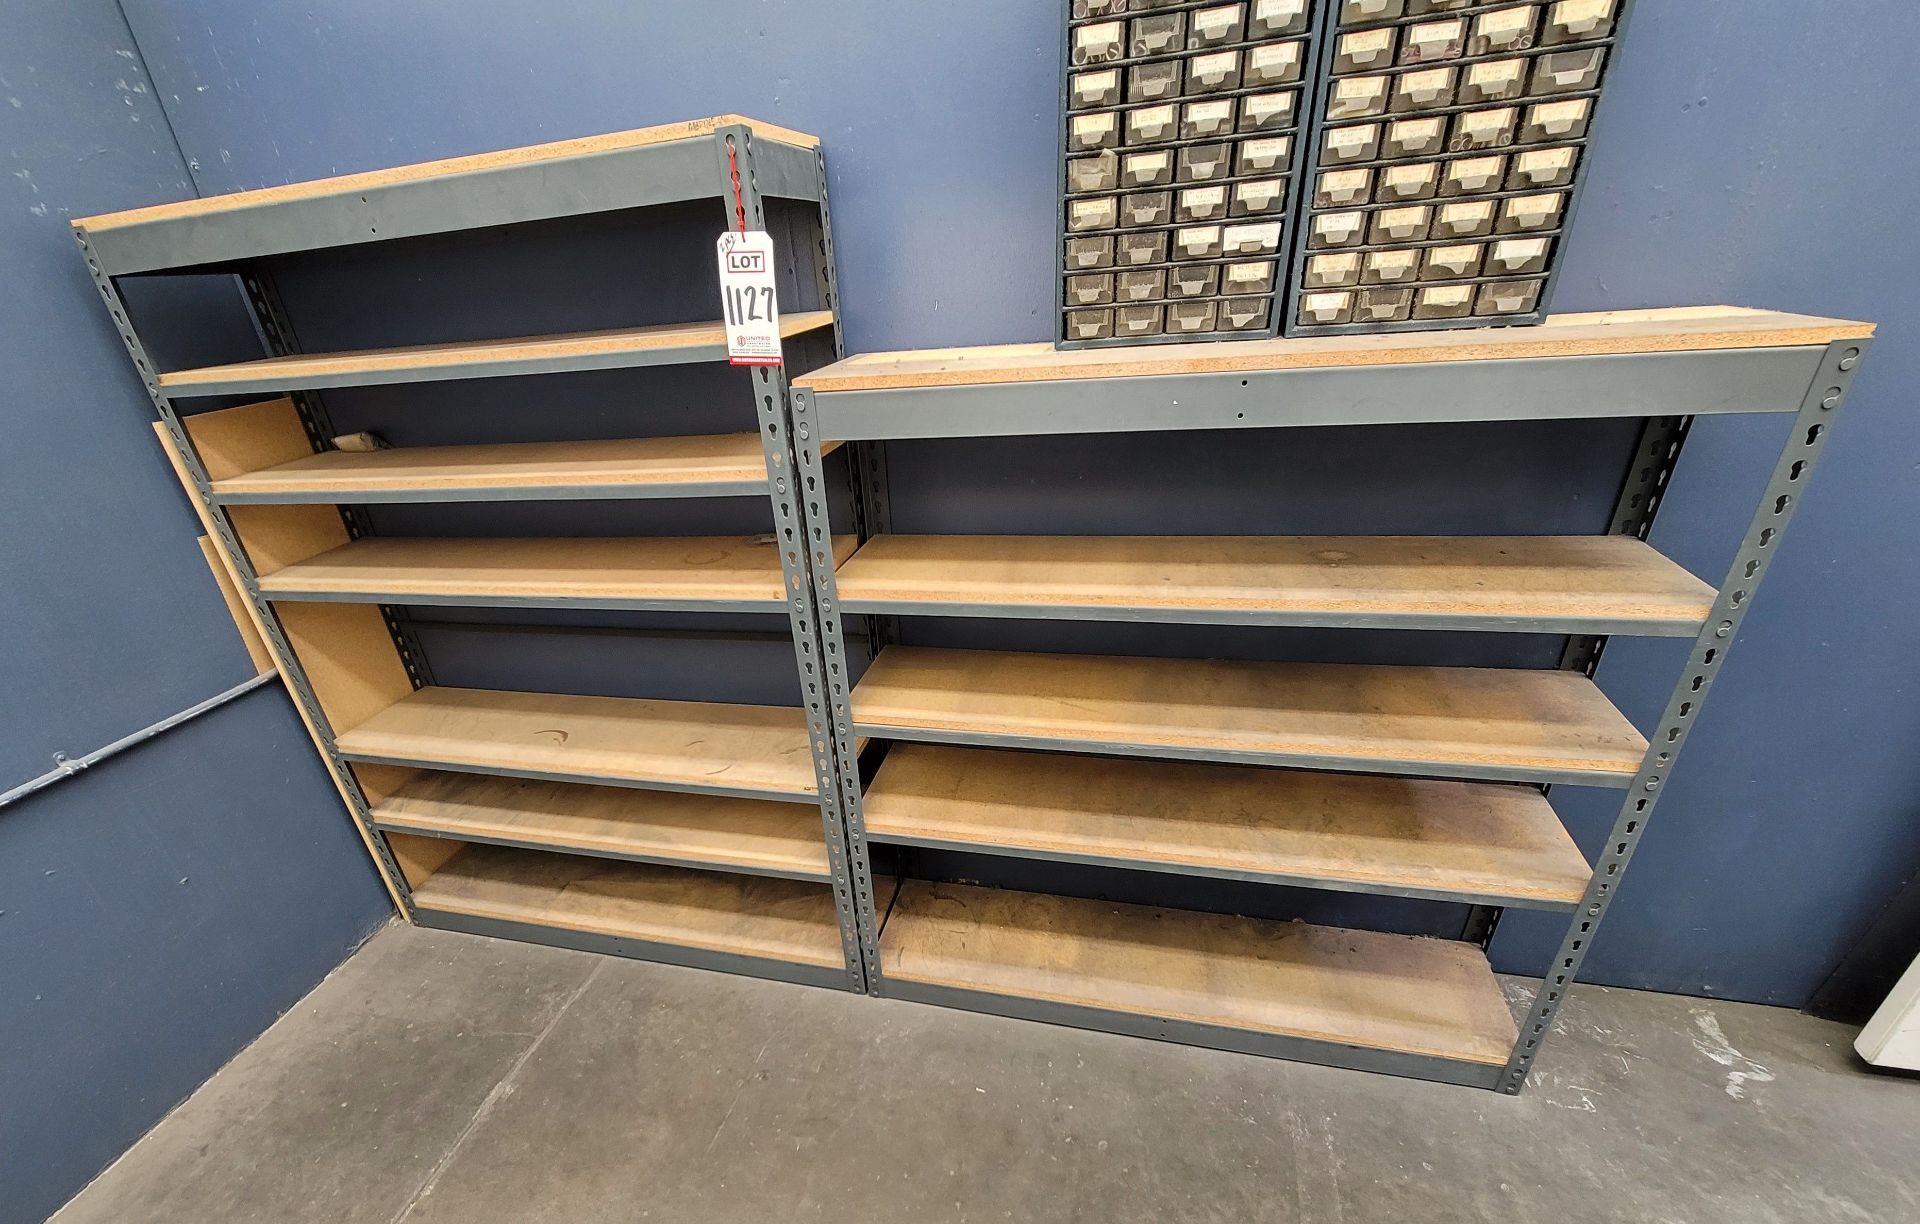 LOT - (2) SHELF UNITS W/ PARTICLE BOARD SHELVES, 4' X 12", CONTENTS NOT INCLUDED